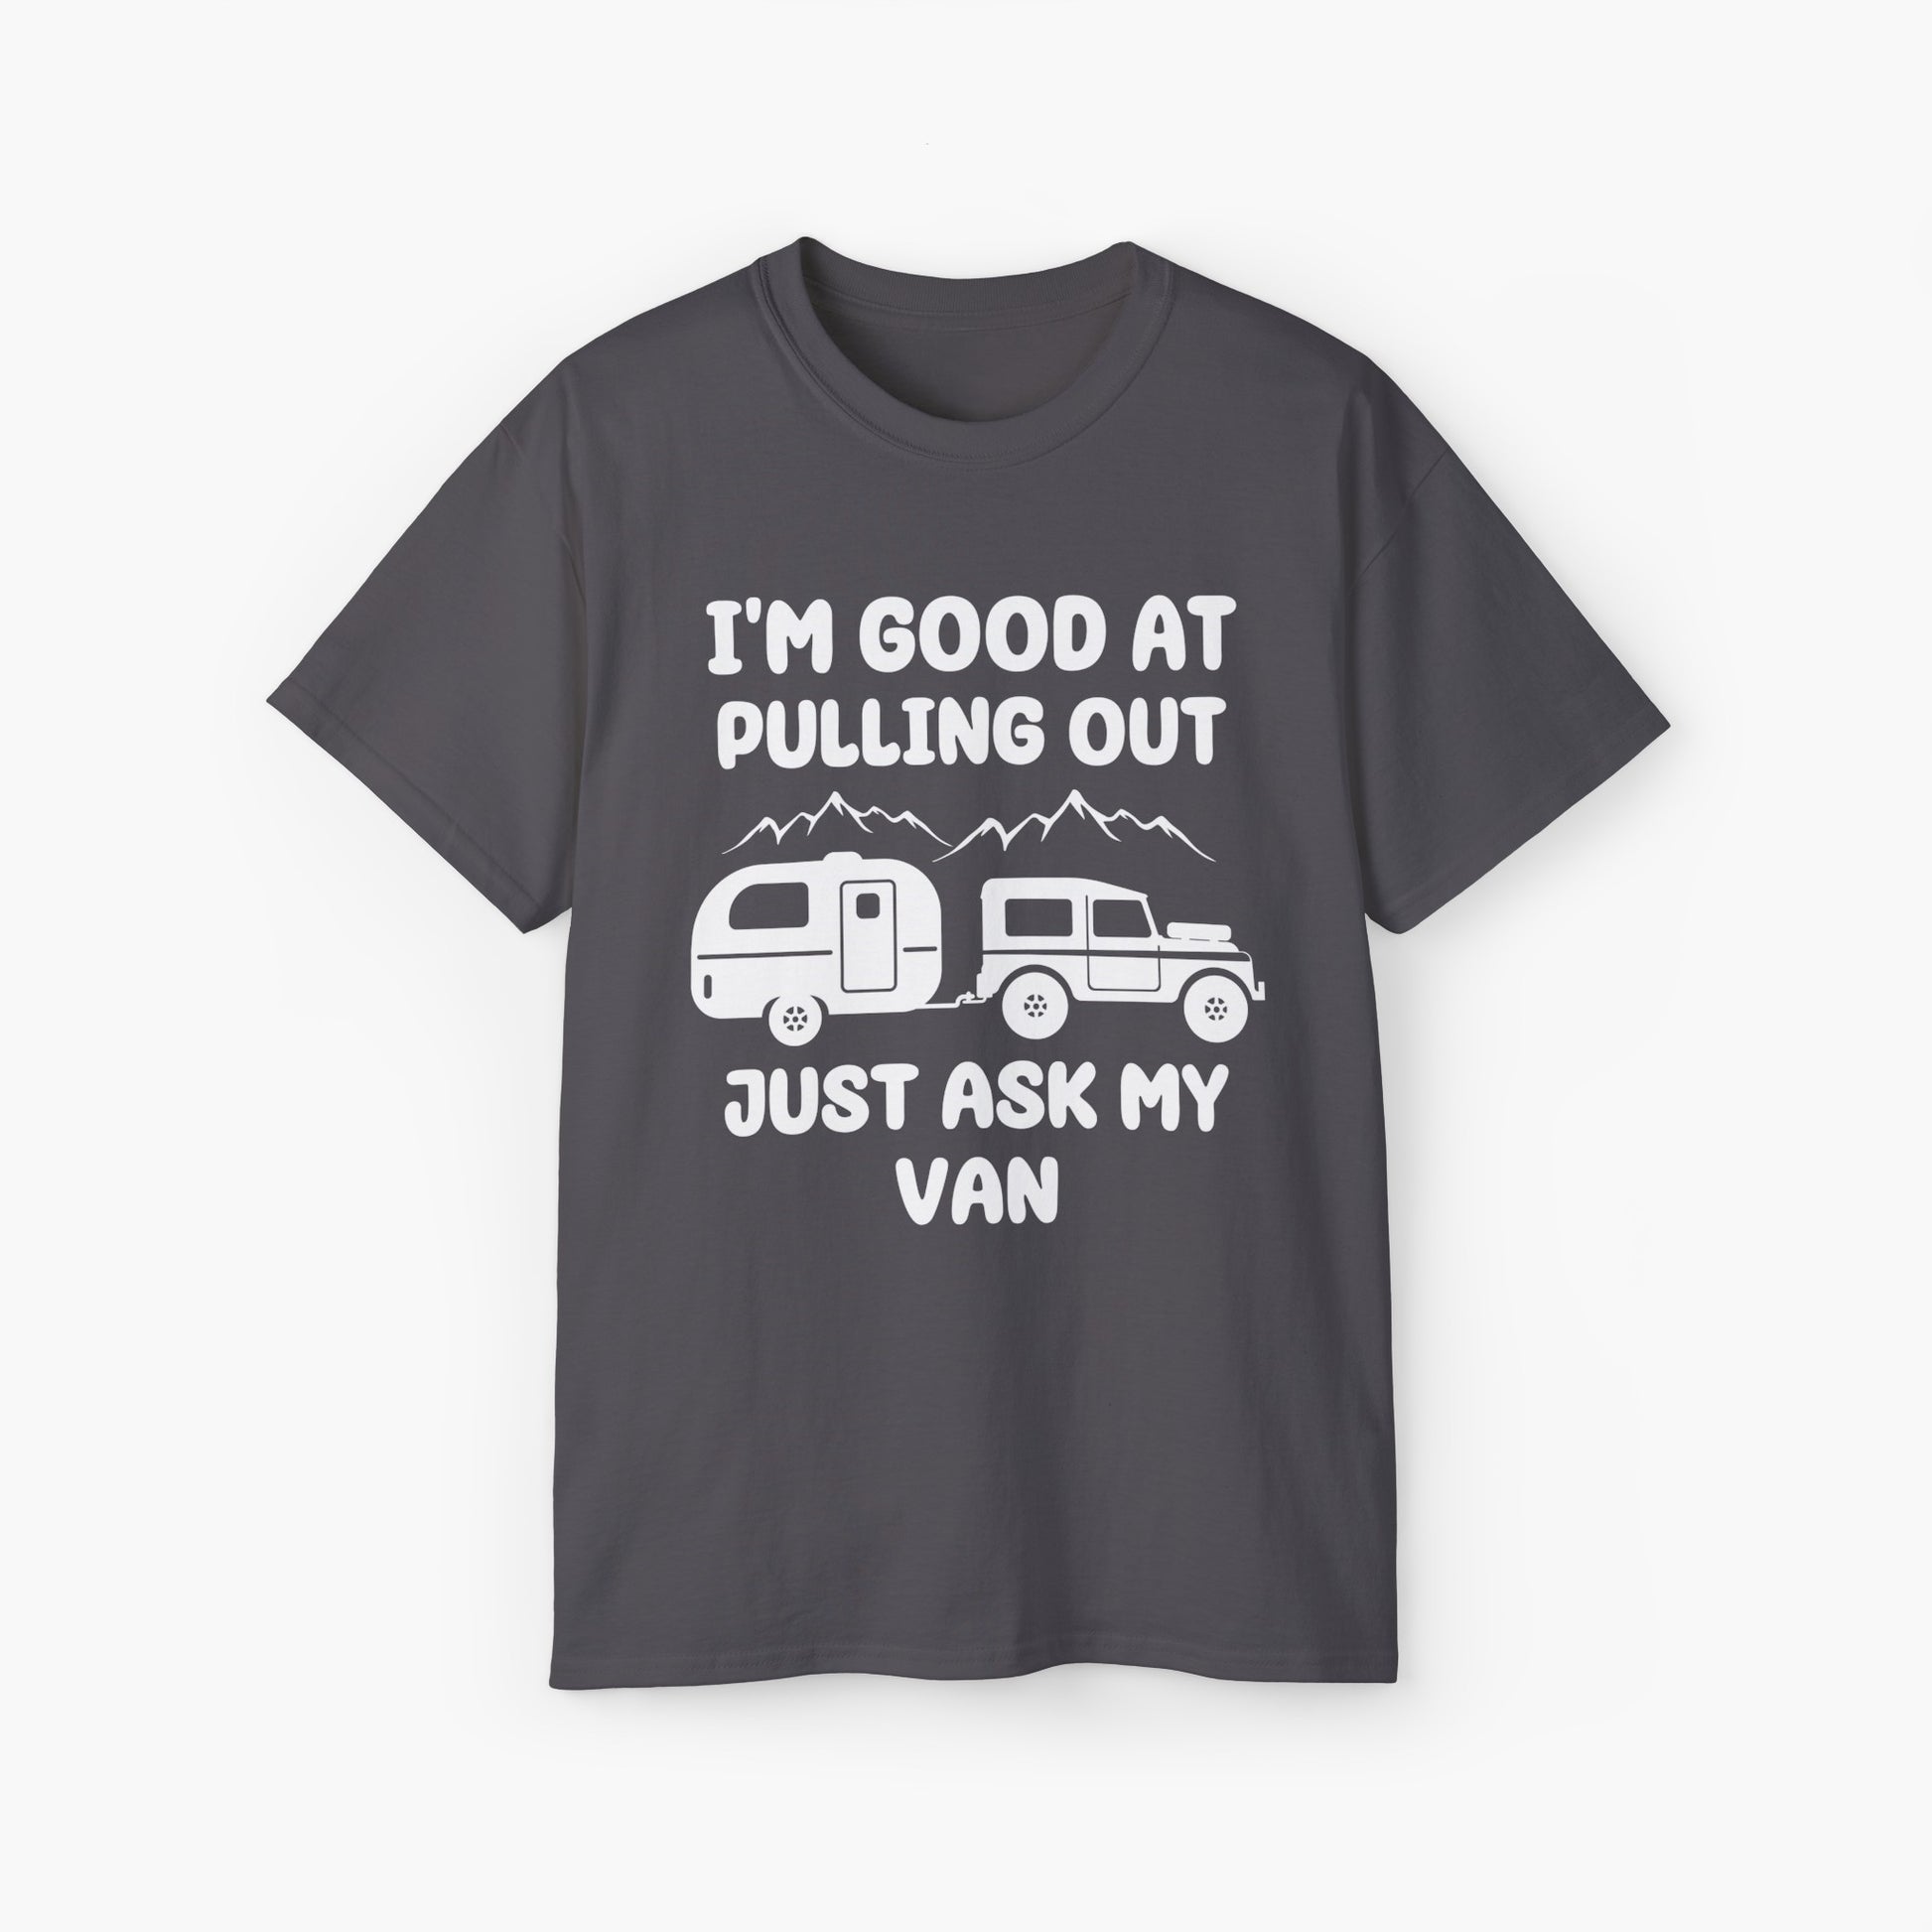 Dark grey t-shirt with humorous text 'I'm good at pulling out, just ask my van,' featuring an image of a truck pulling a camping van, set against mountains on a plain background.